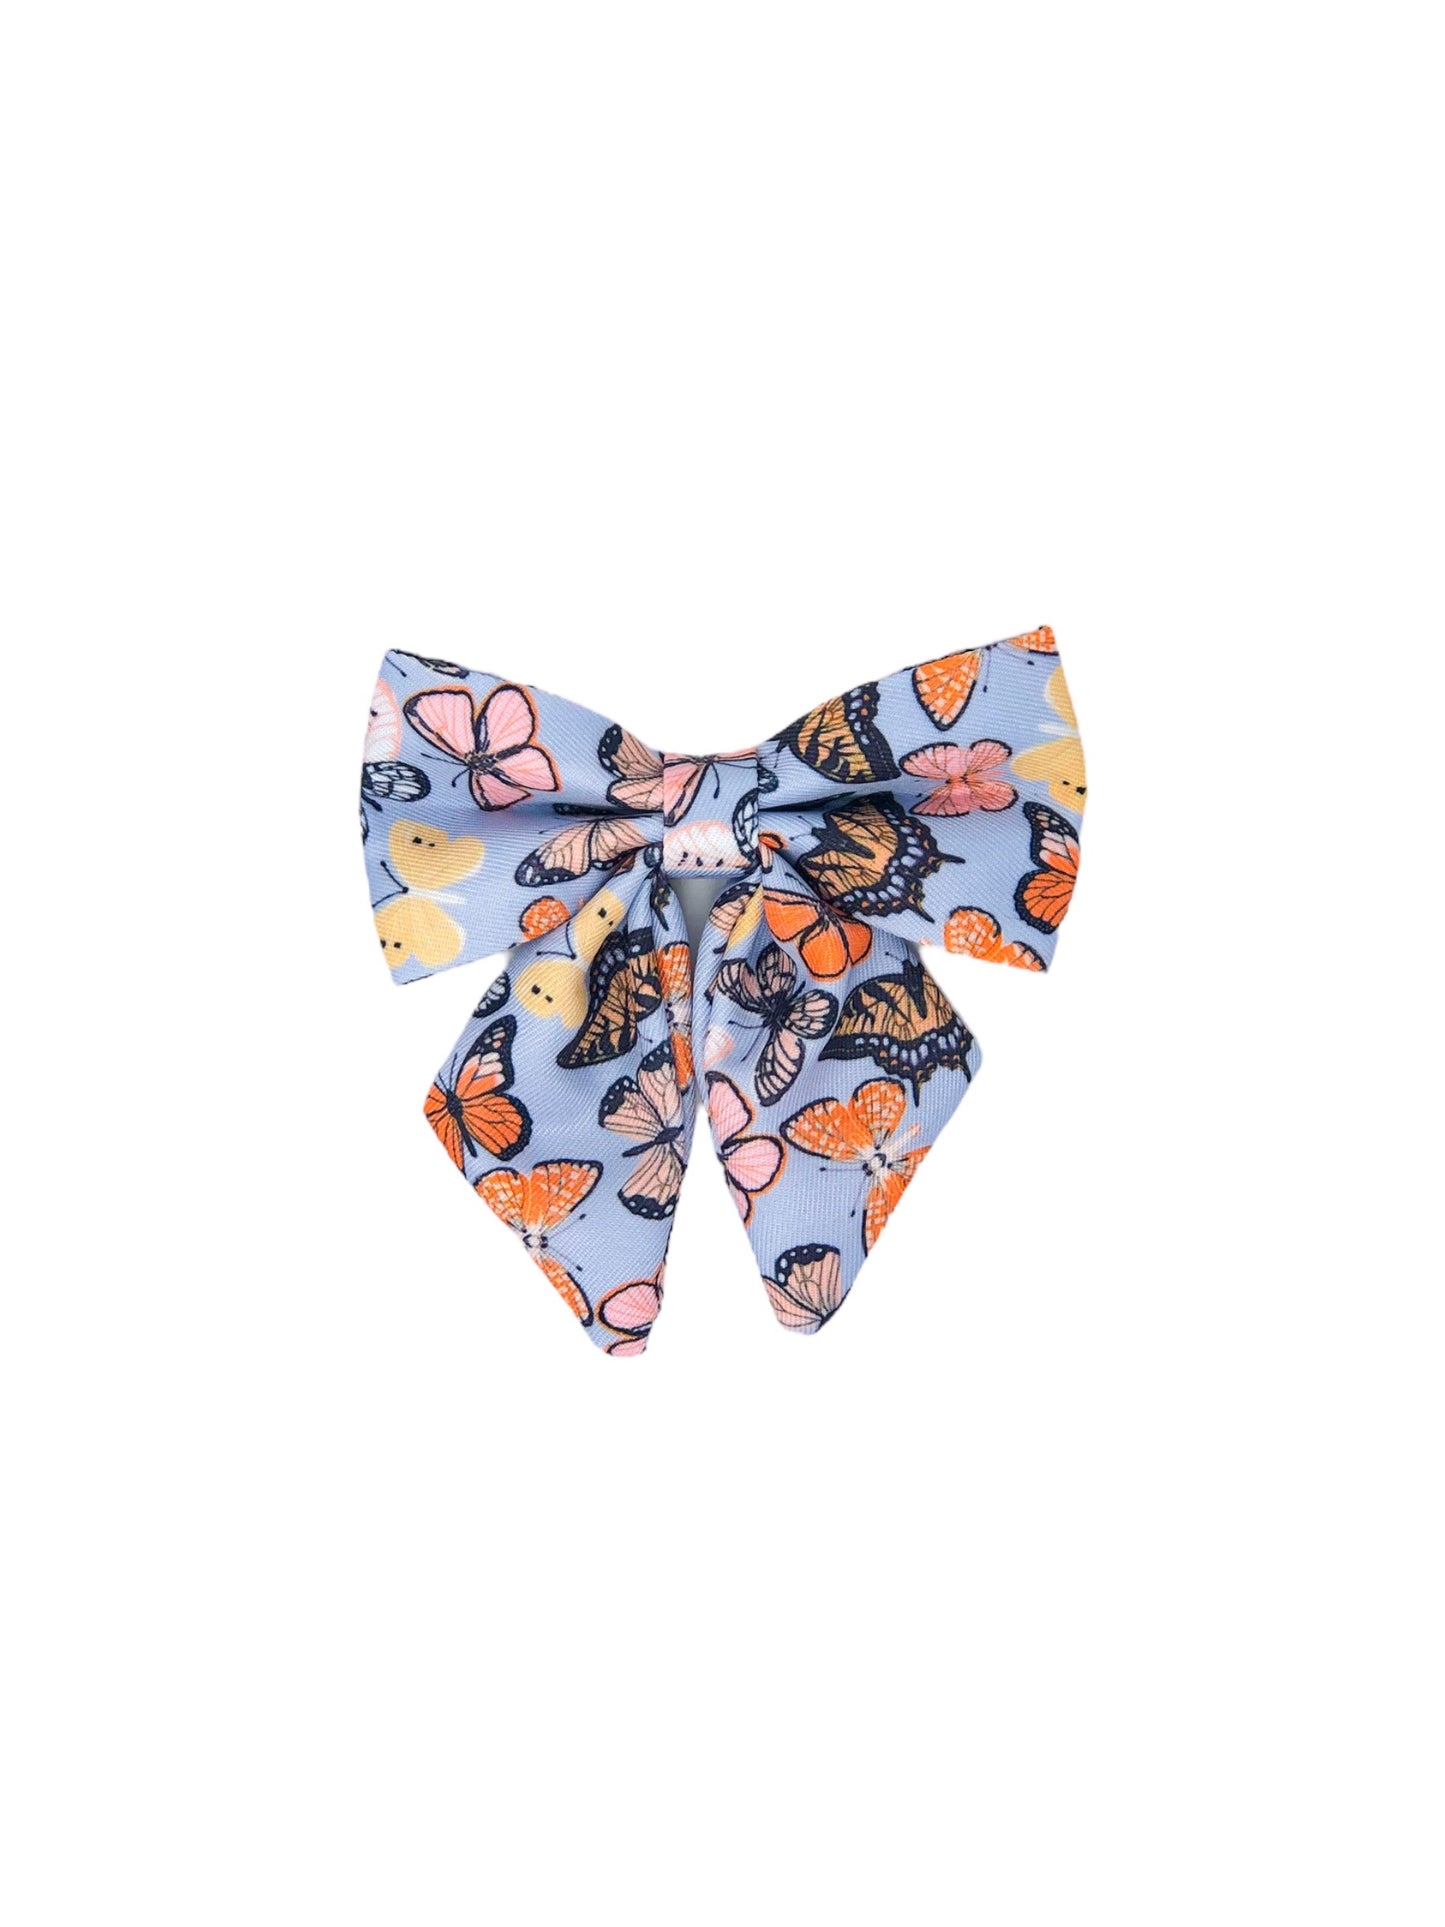 The Beautiful Butterfly Bow Tie